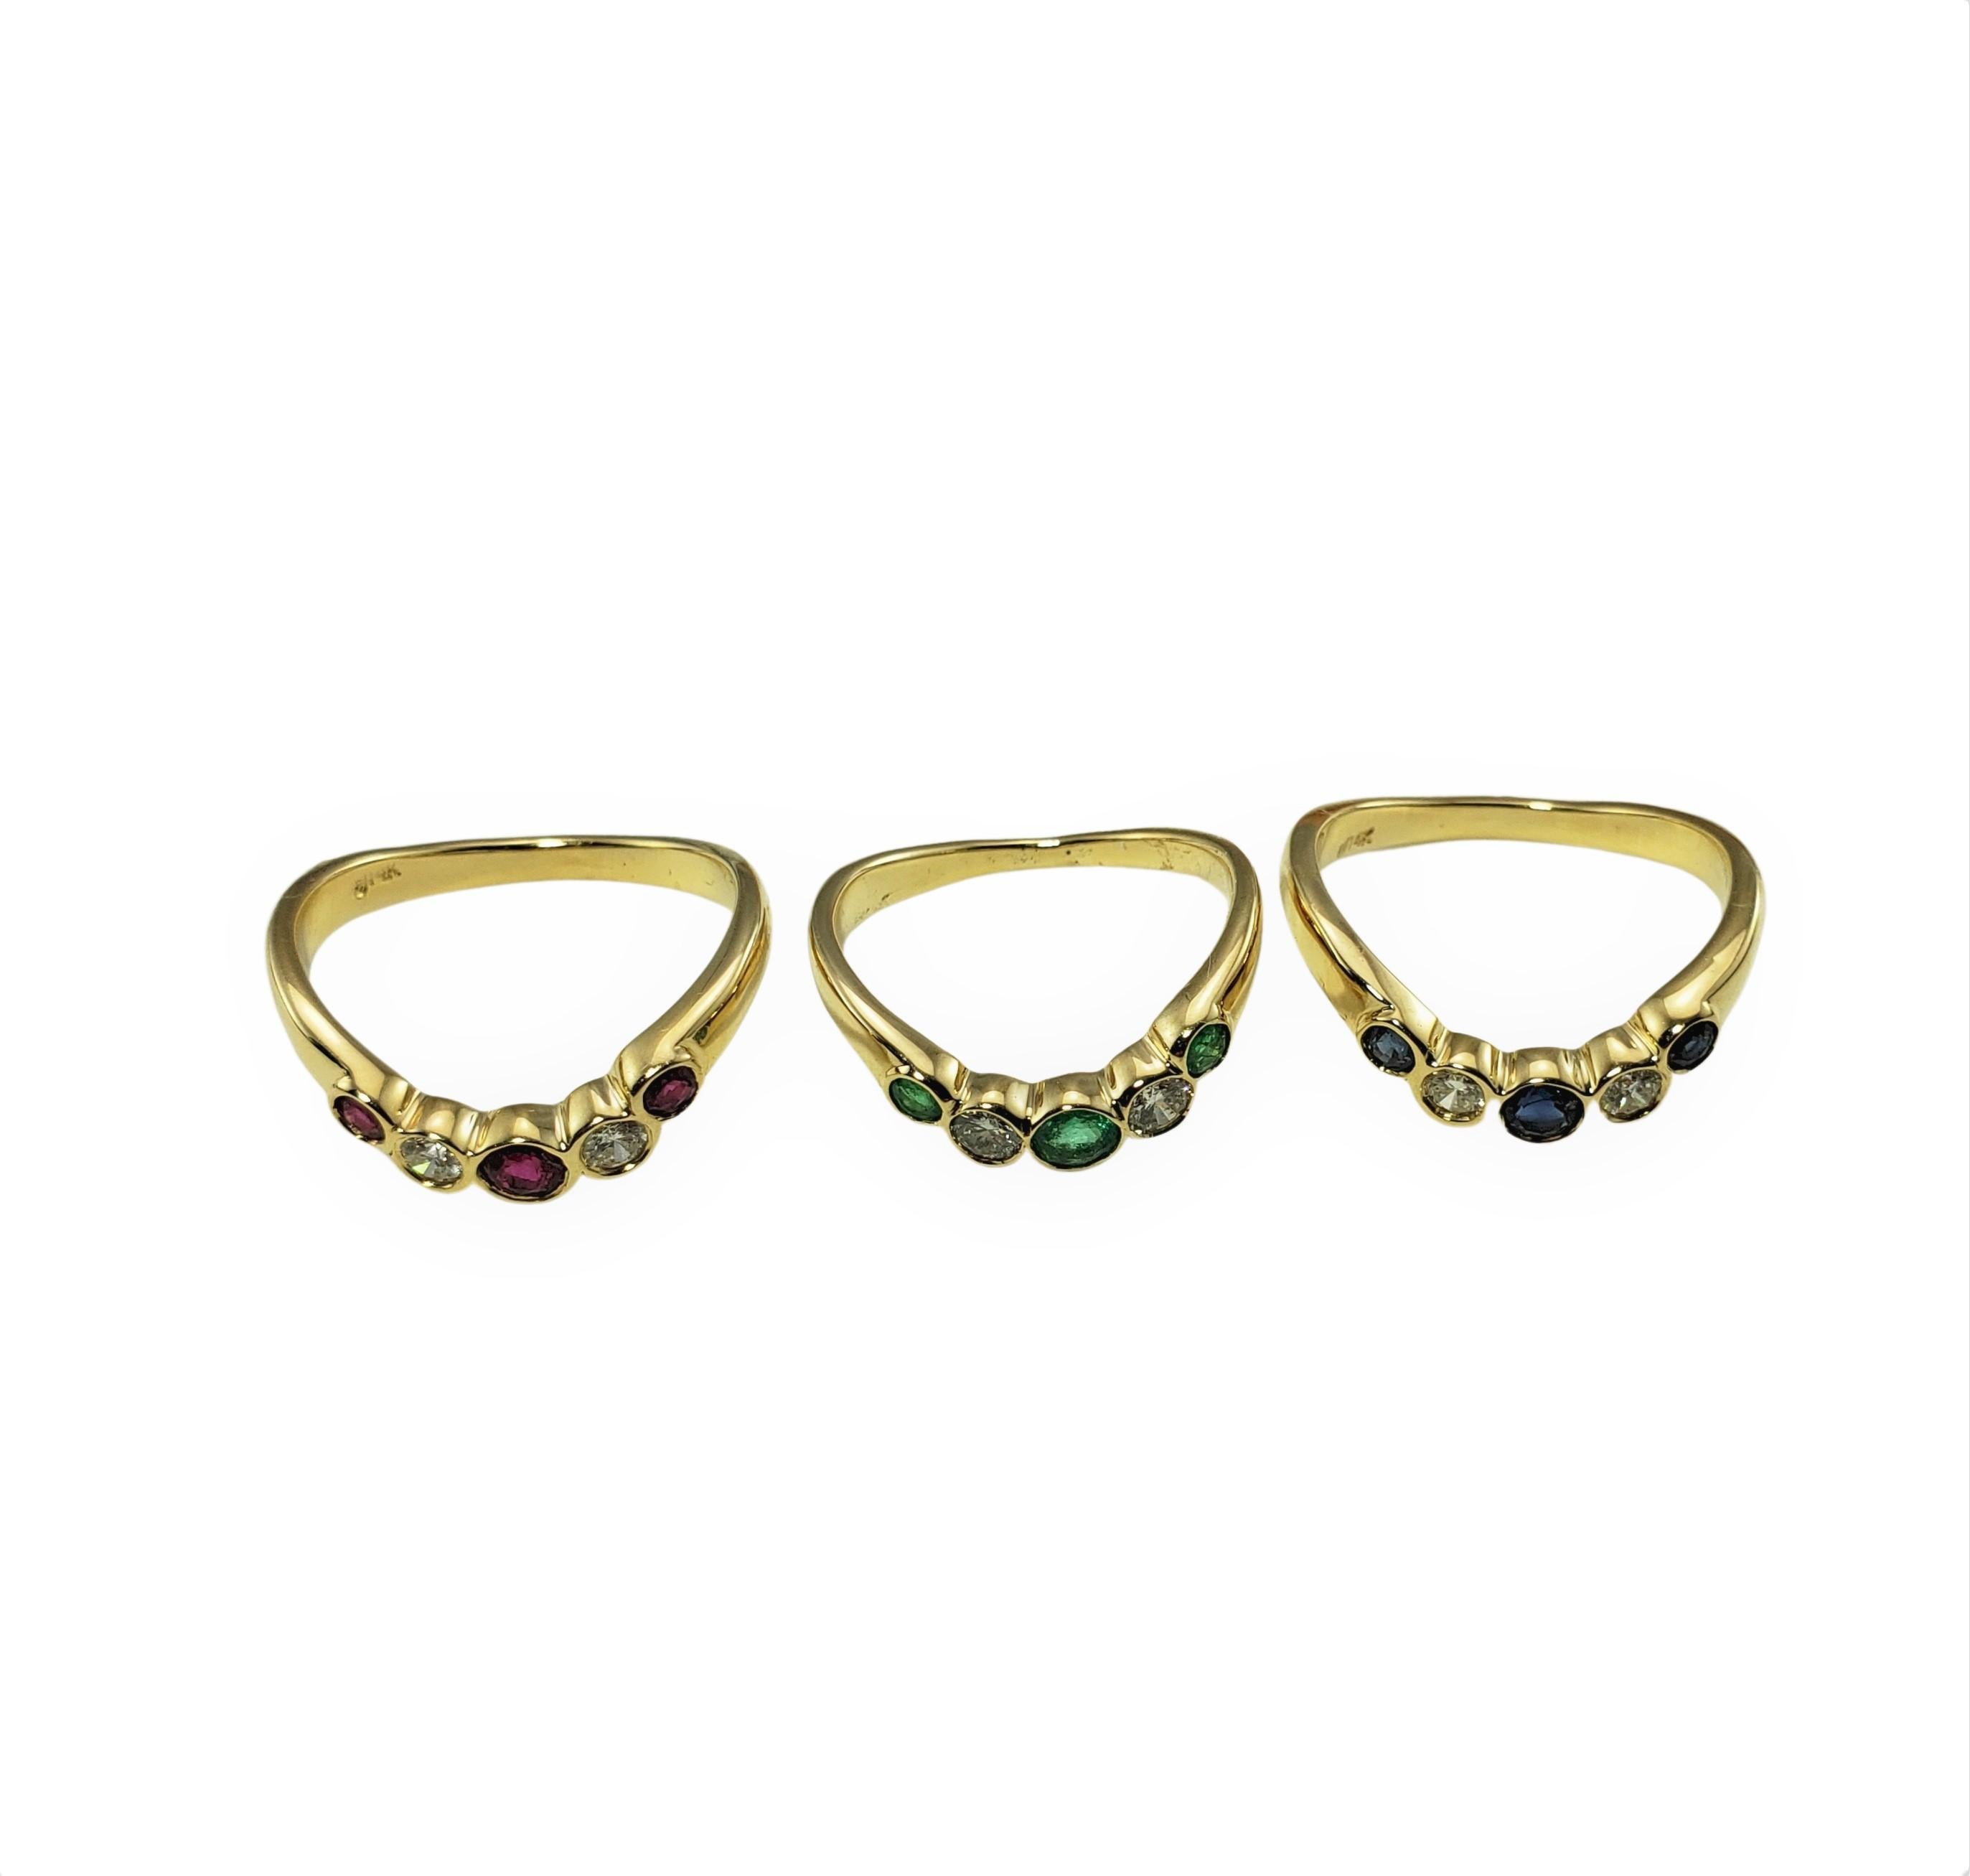 Set of Three 14 Karat Yellow Gold Emerald/Ruby/Sapphire and Diamond Rings Size 5.5-6.25

This set of three rings each feature three round gemstones (emerald, ruby, sapphire) and two round brilliant cut diamonds set in classic 14K yellow gold.  Width